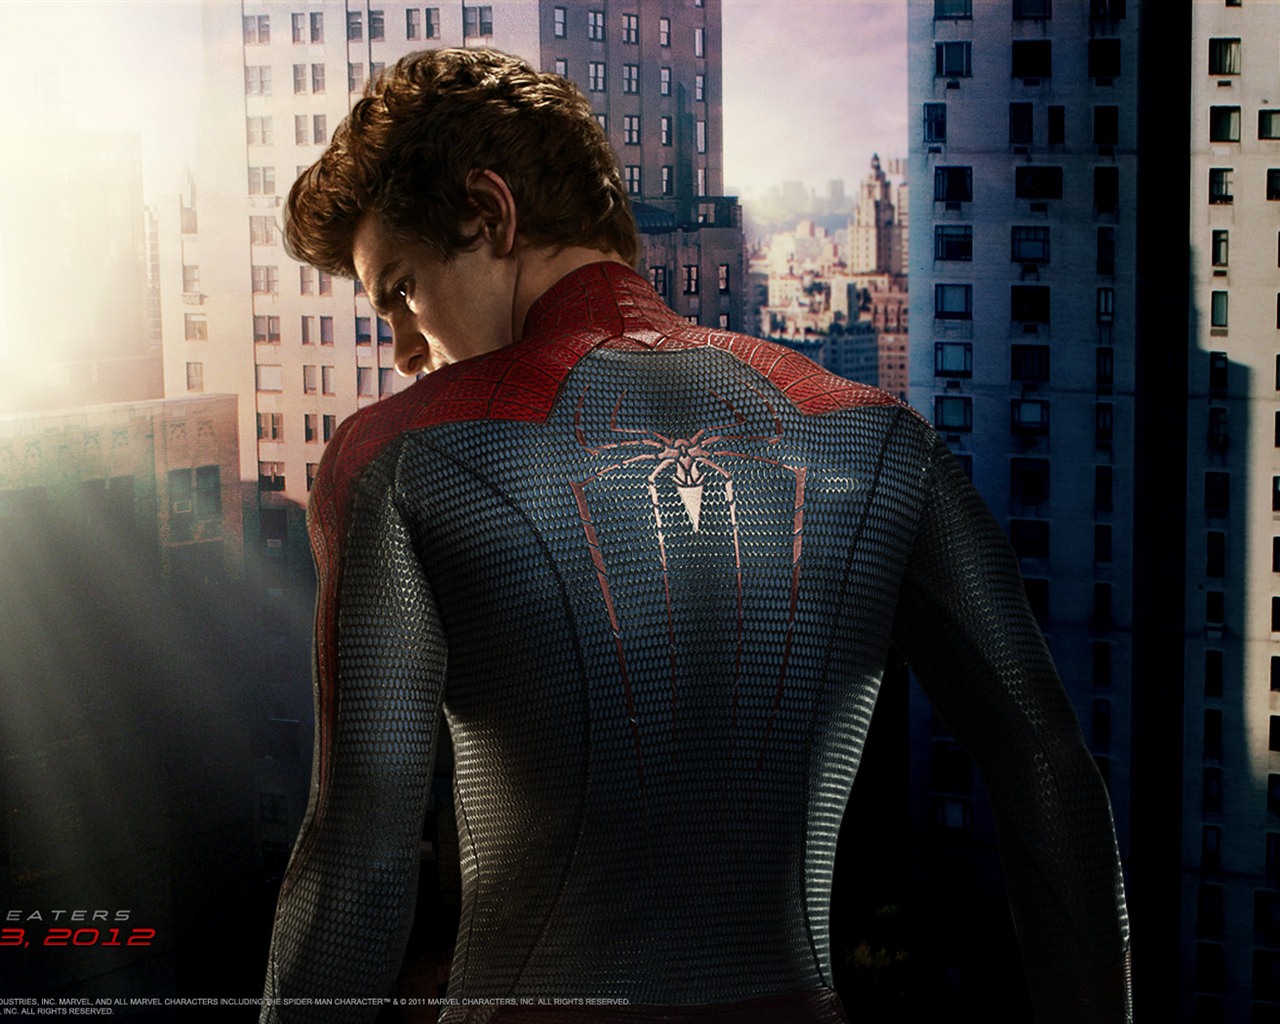 Le 2012 Amazing Spider-Man wallpapers #5 - 1280x1024